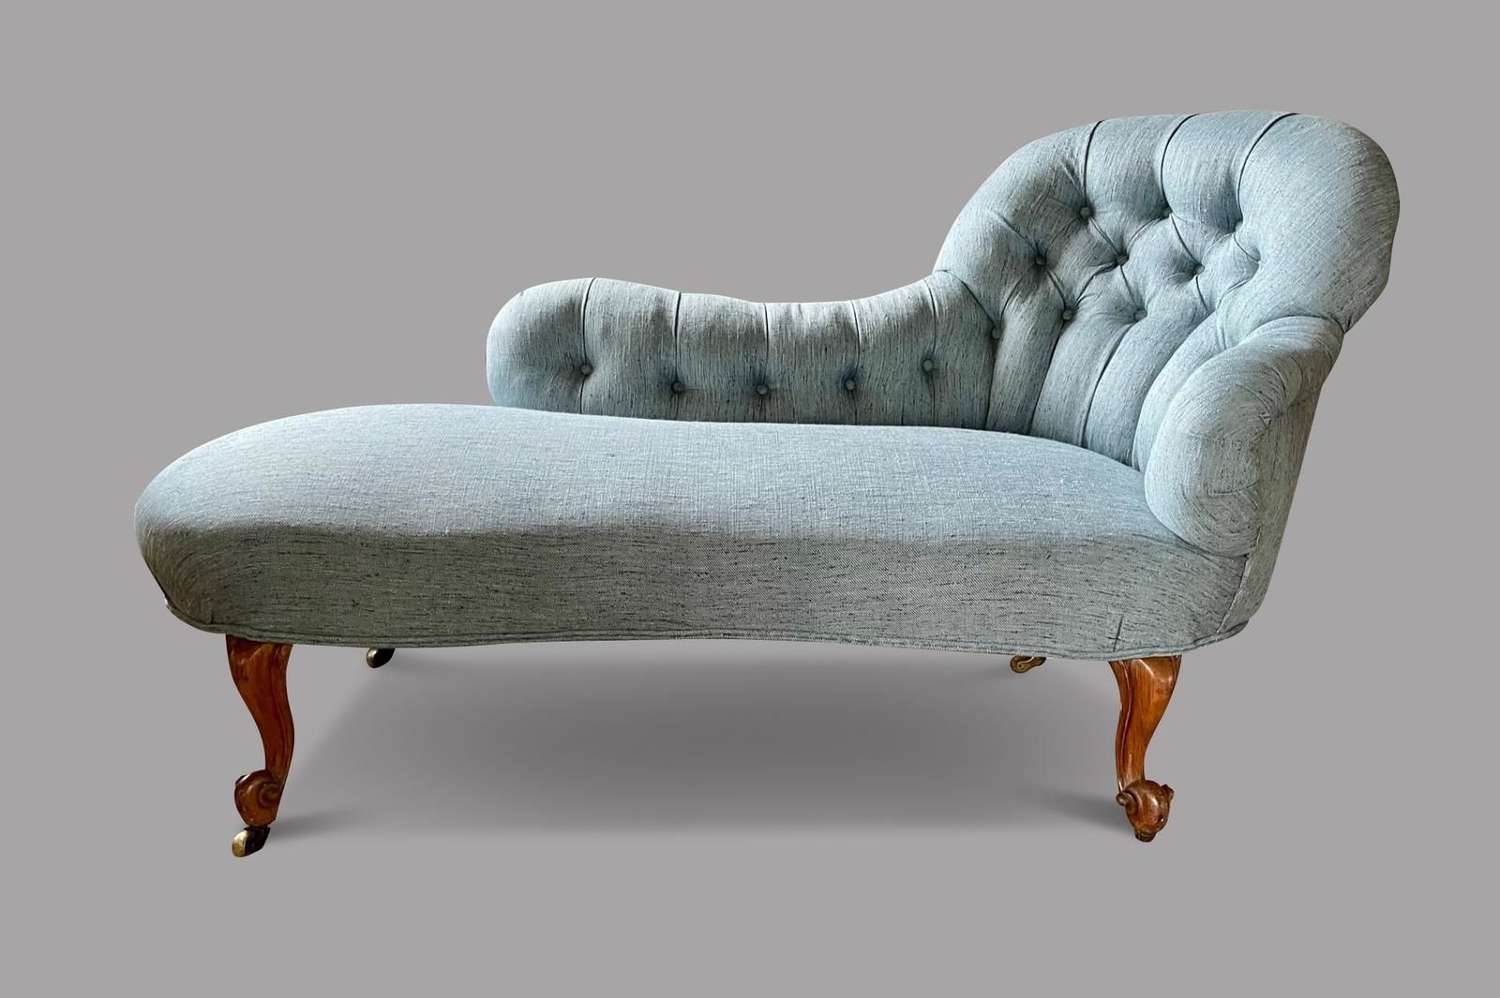 Lovely Victorian Walnut Chaise Longue